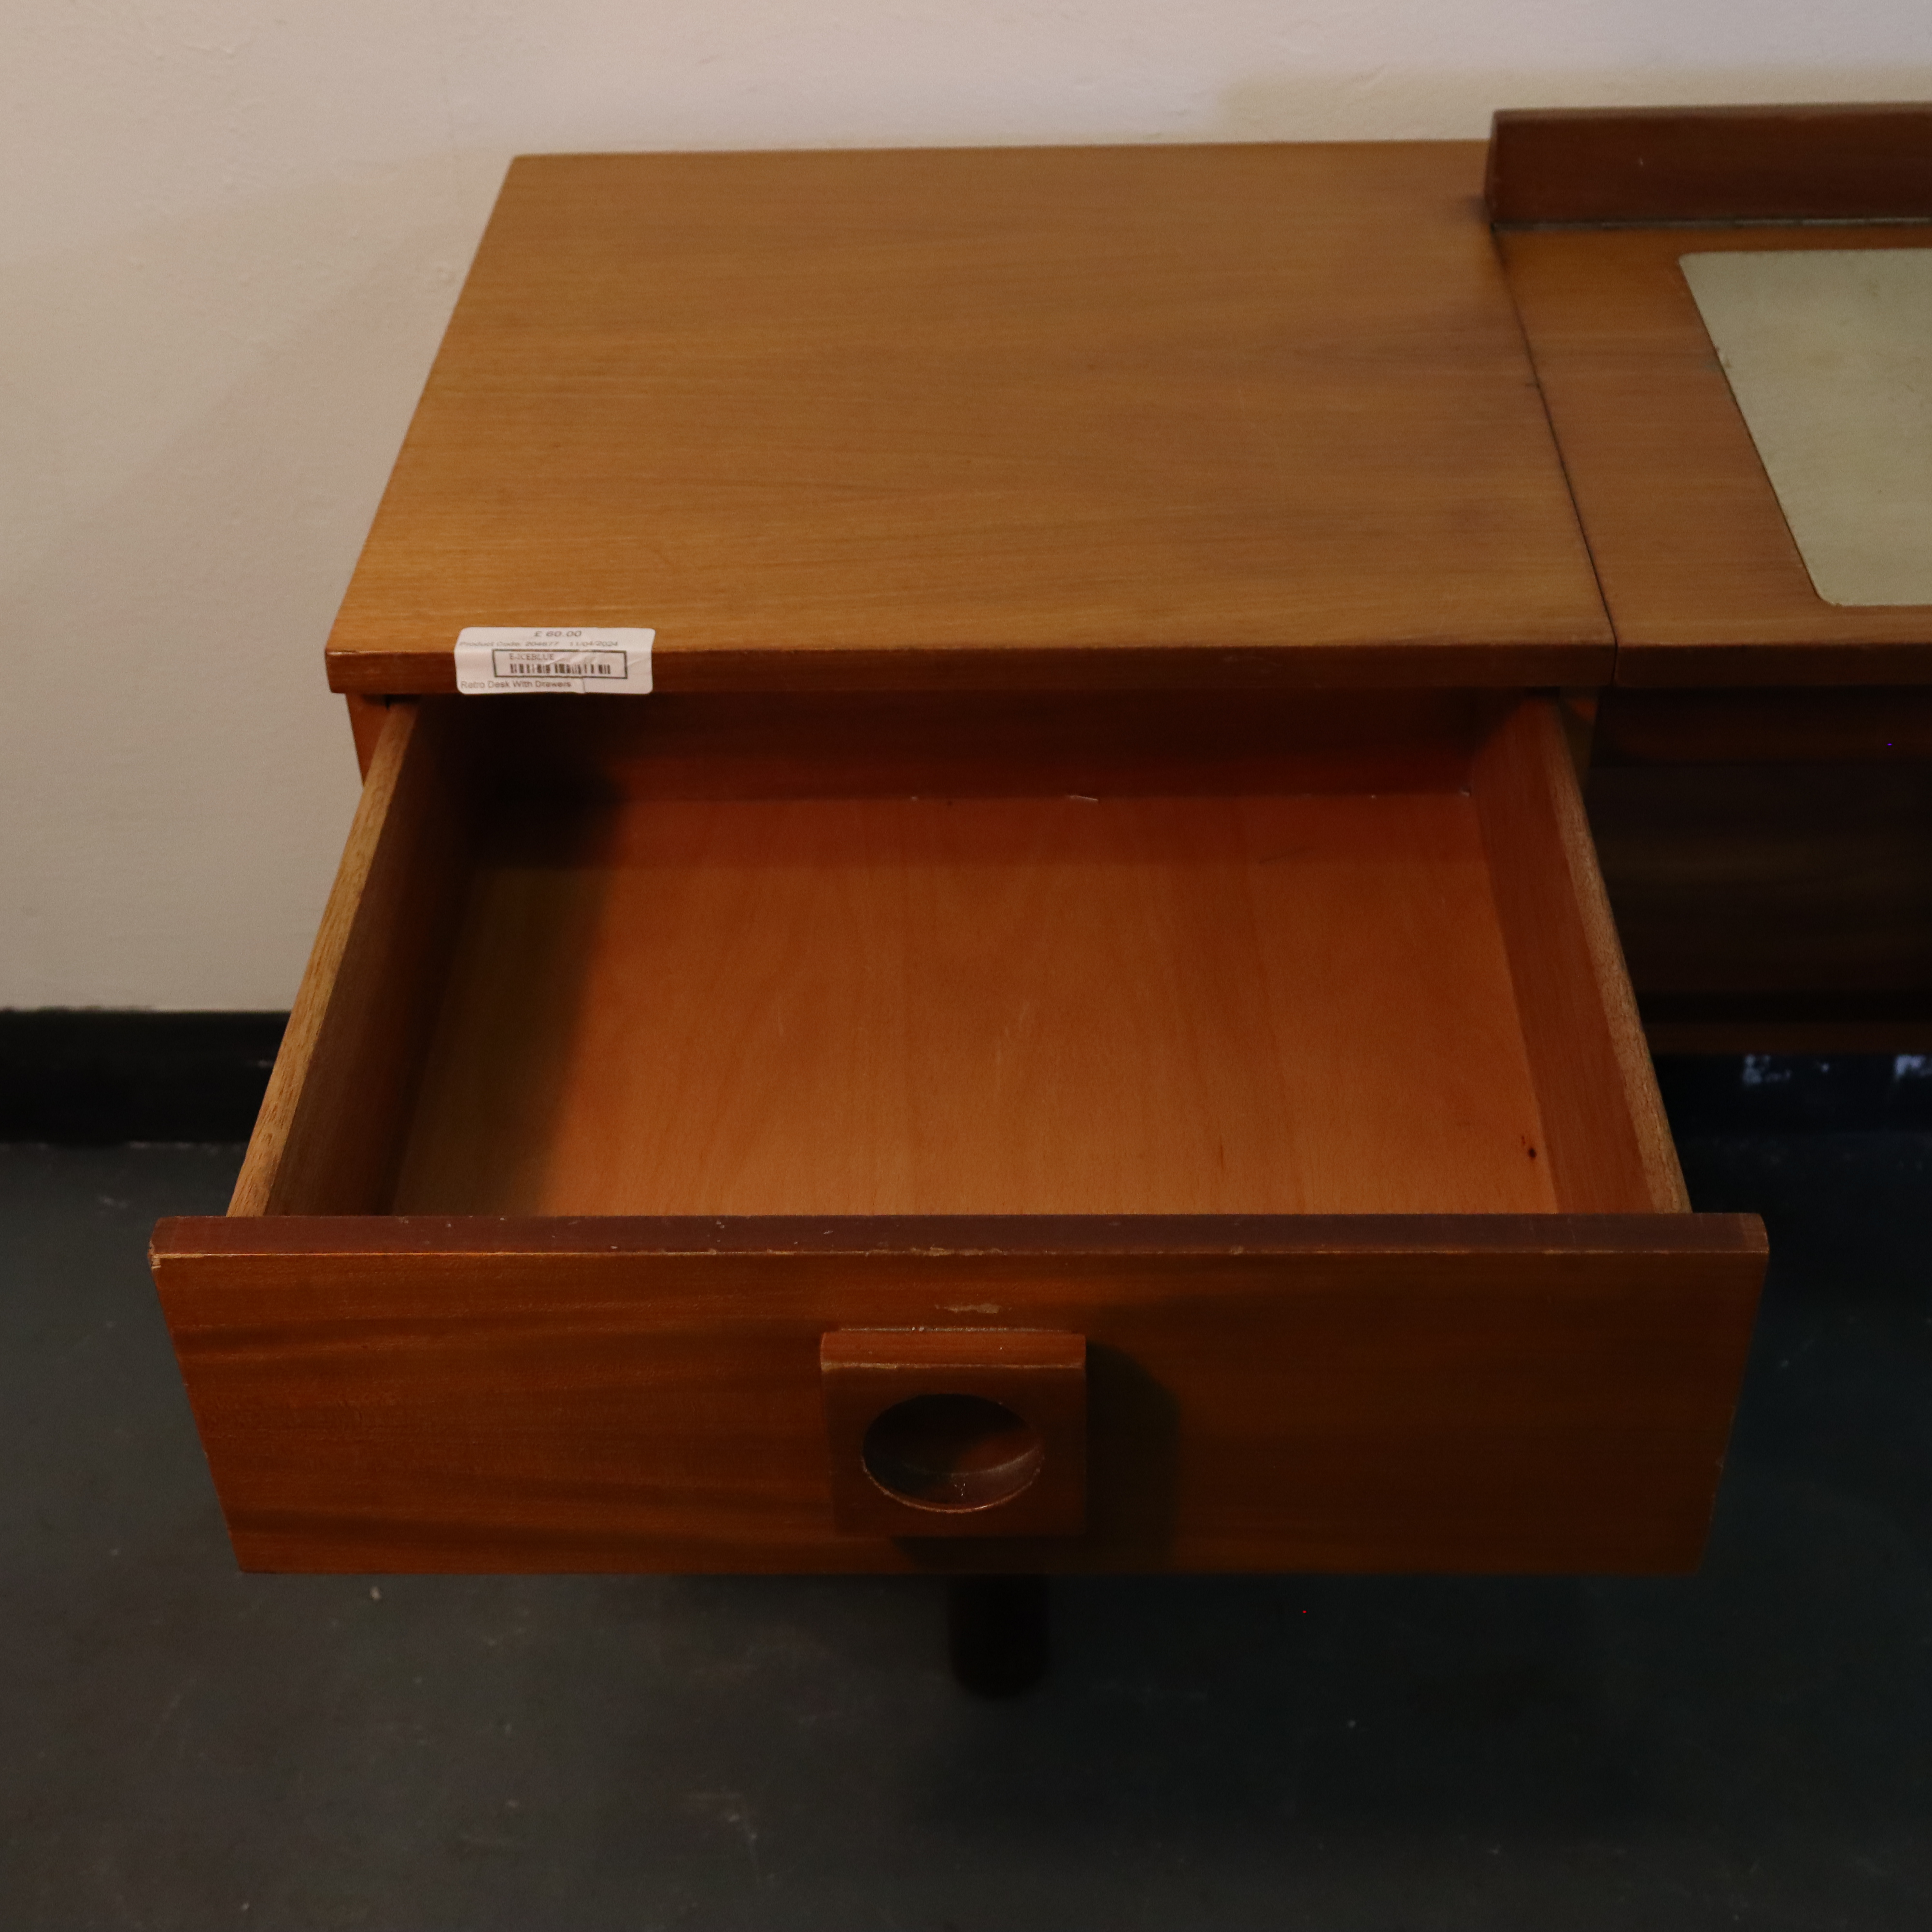 Retro Desk With Drawers